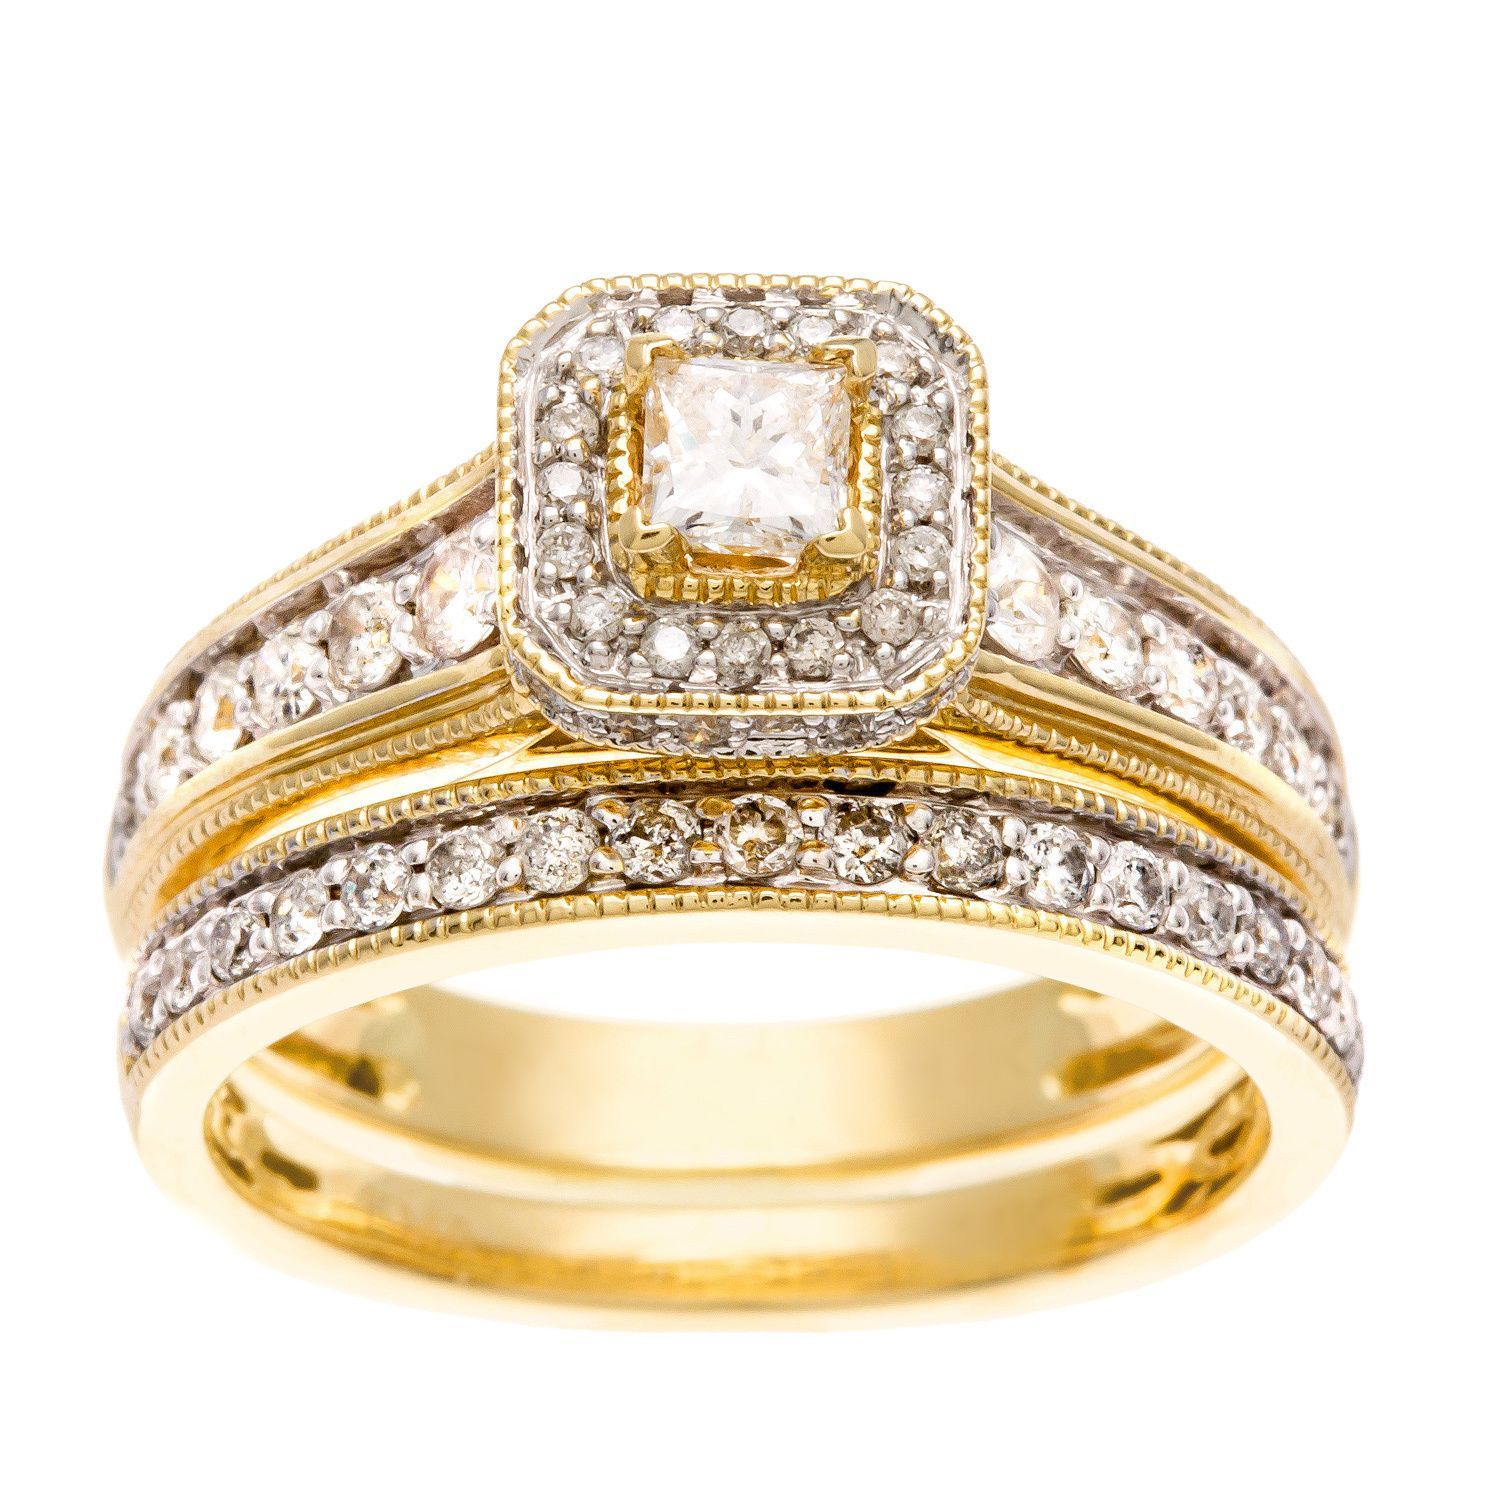 Our Best Wedding Ring Set Deals  Diamond Bridal Ring Sets serapportantà Jewellery Under 3000000 Online Shopping